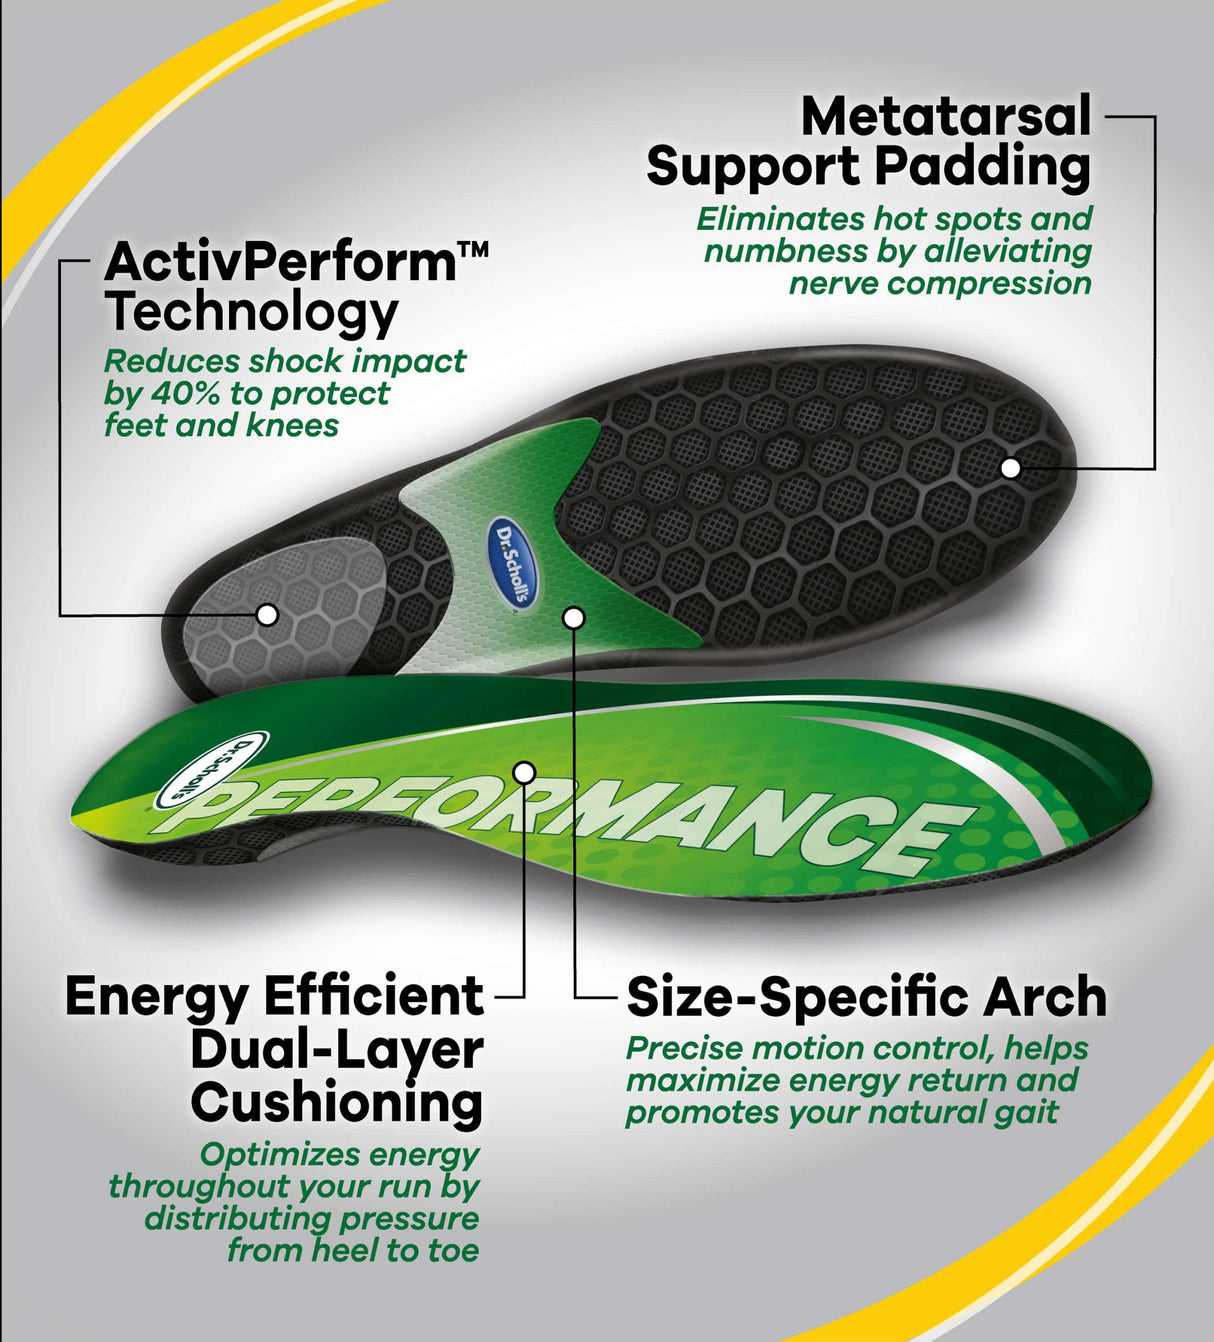 Image of top and bottom of Dr. Scholl's Performance Running Insoles